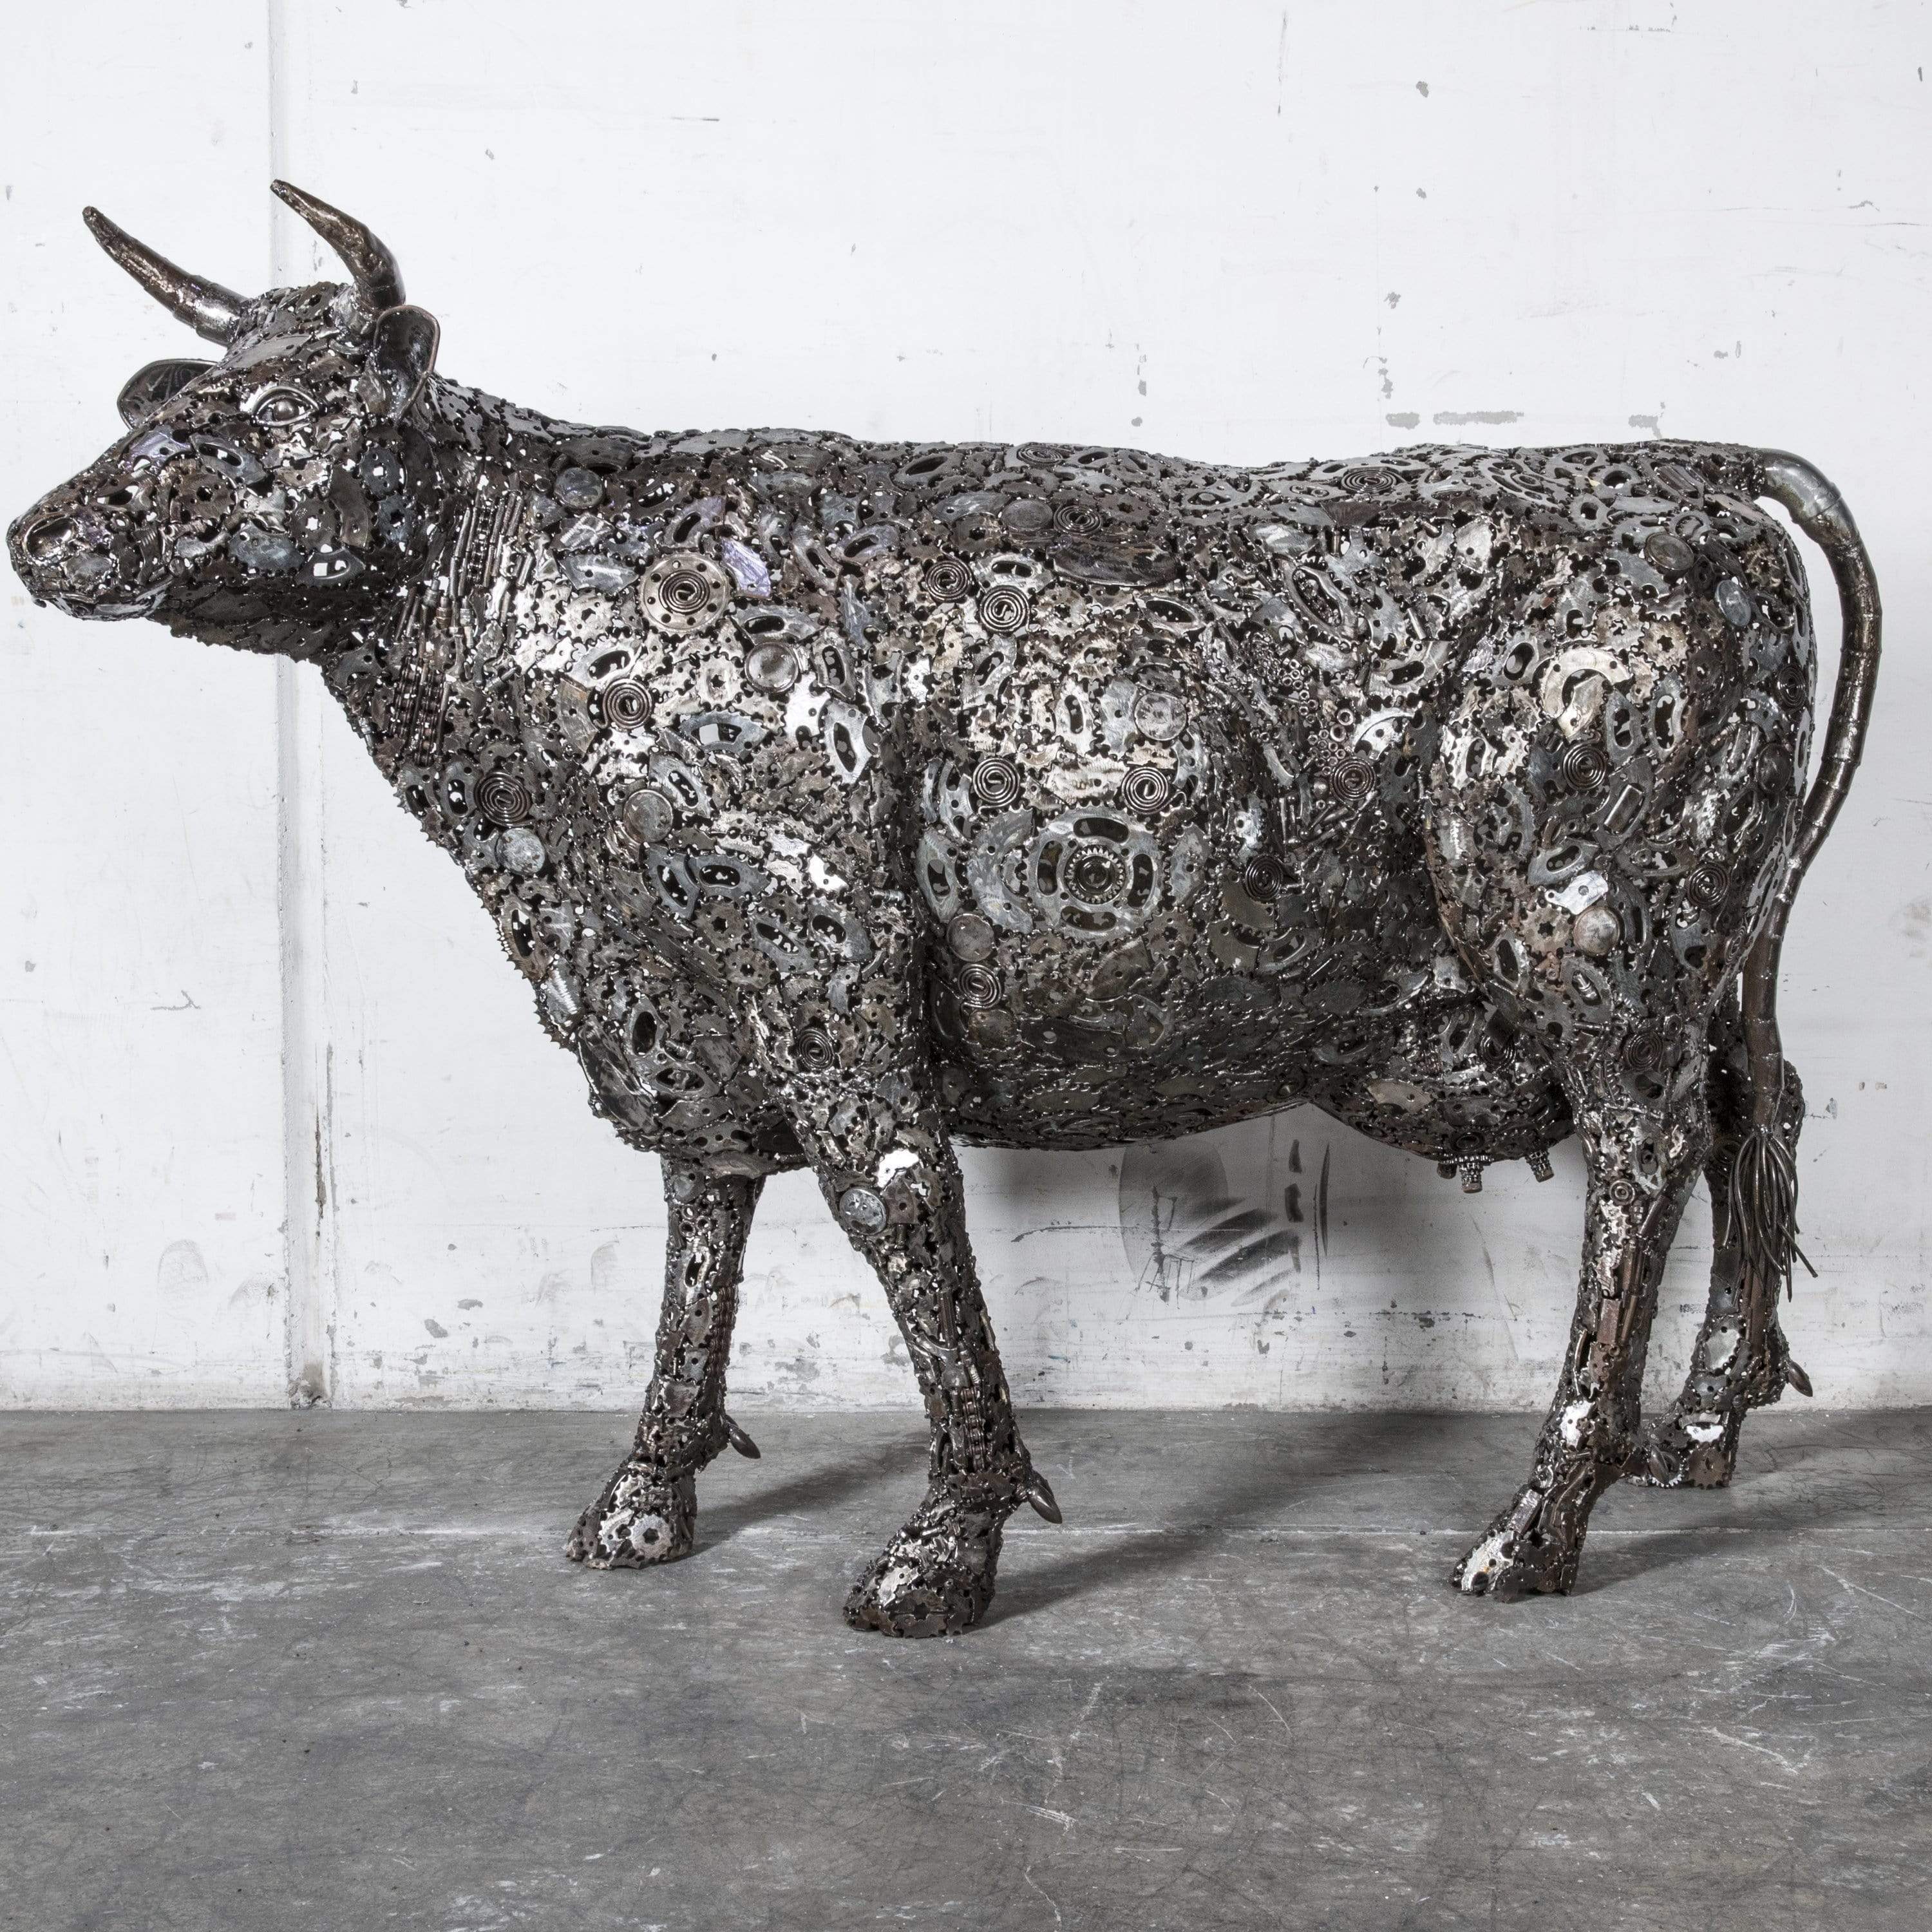 Kalifano Recycled Metal Art 61‚Äù Cow Recycled Metal Art Sculpture RMS-COW150-P01